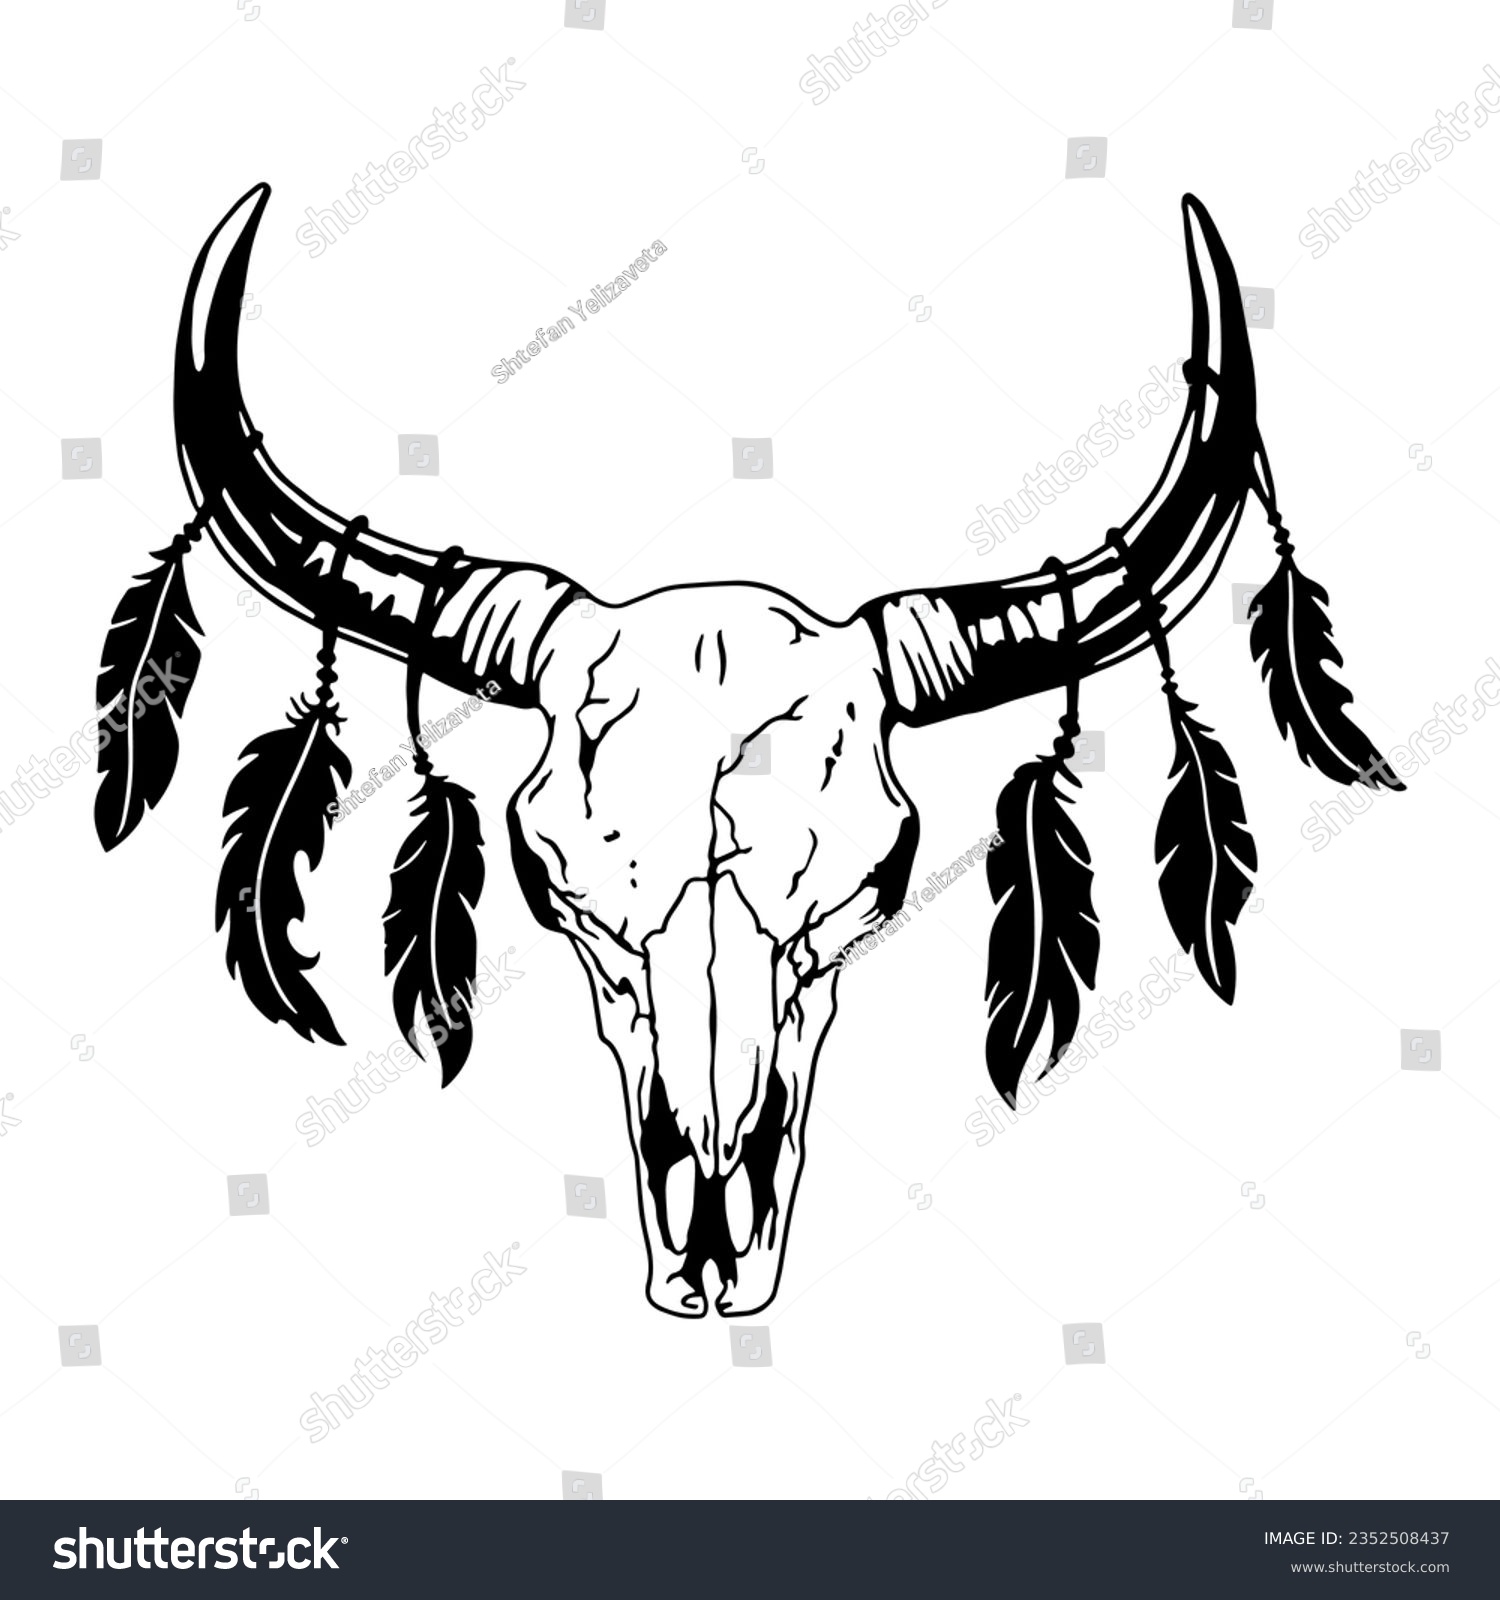 SVG of Texas bull black and white vector illustration. Bull skull with feathers, clipart. Silhouette Texas Longhorn. Bull Head Logo Icon. svg